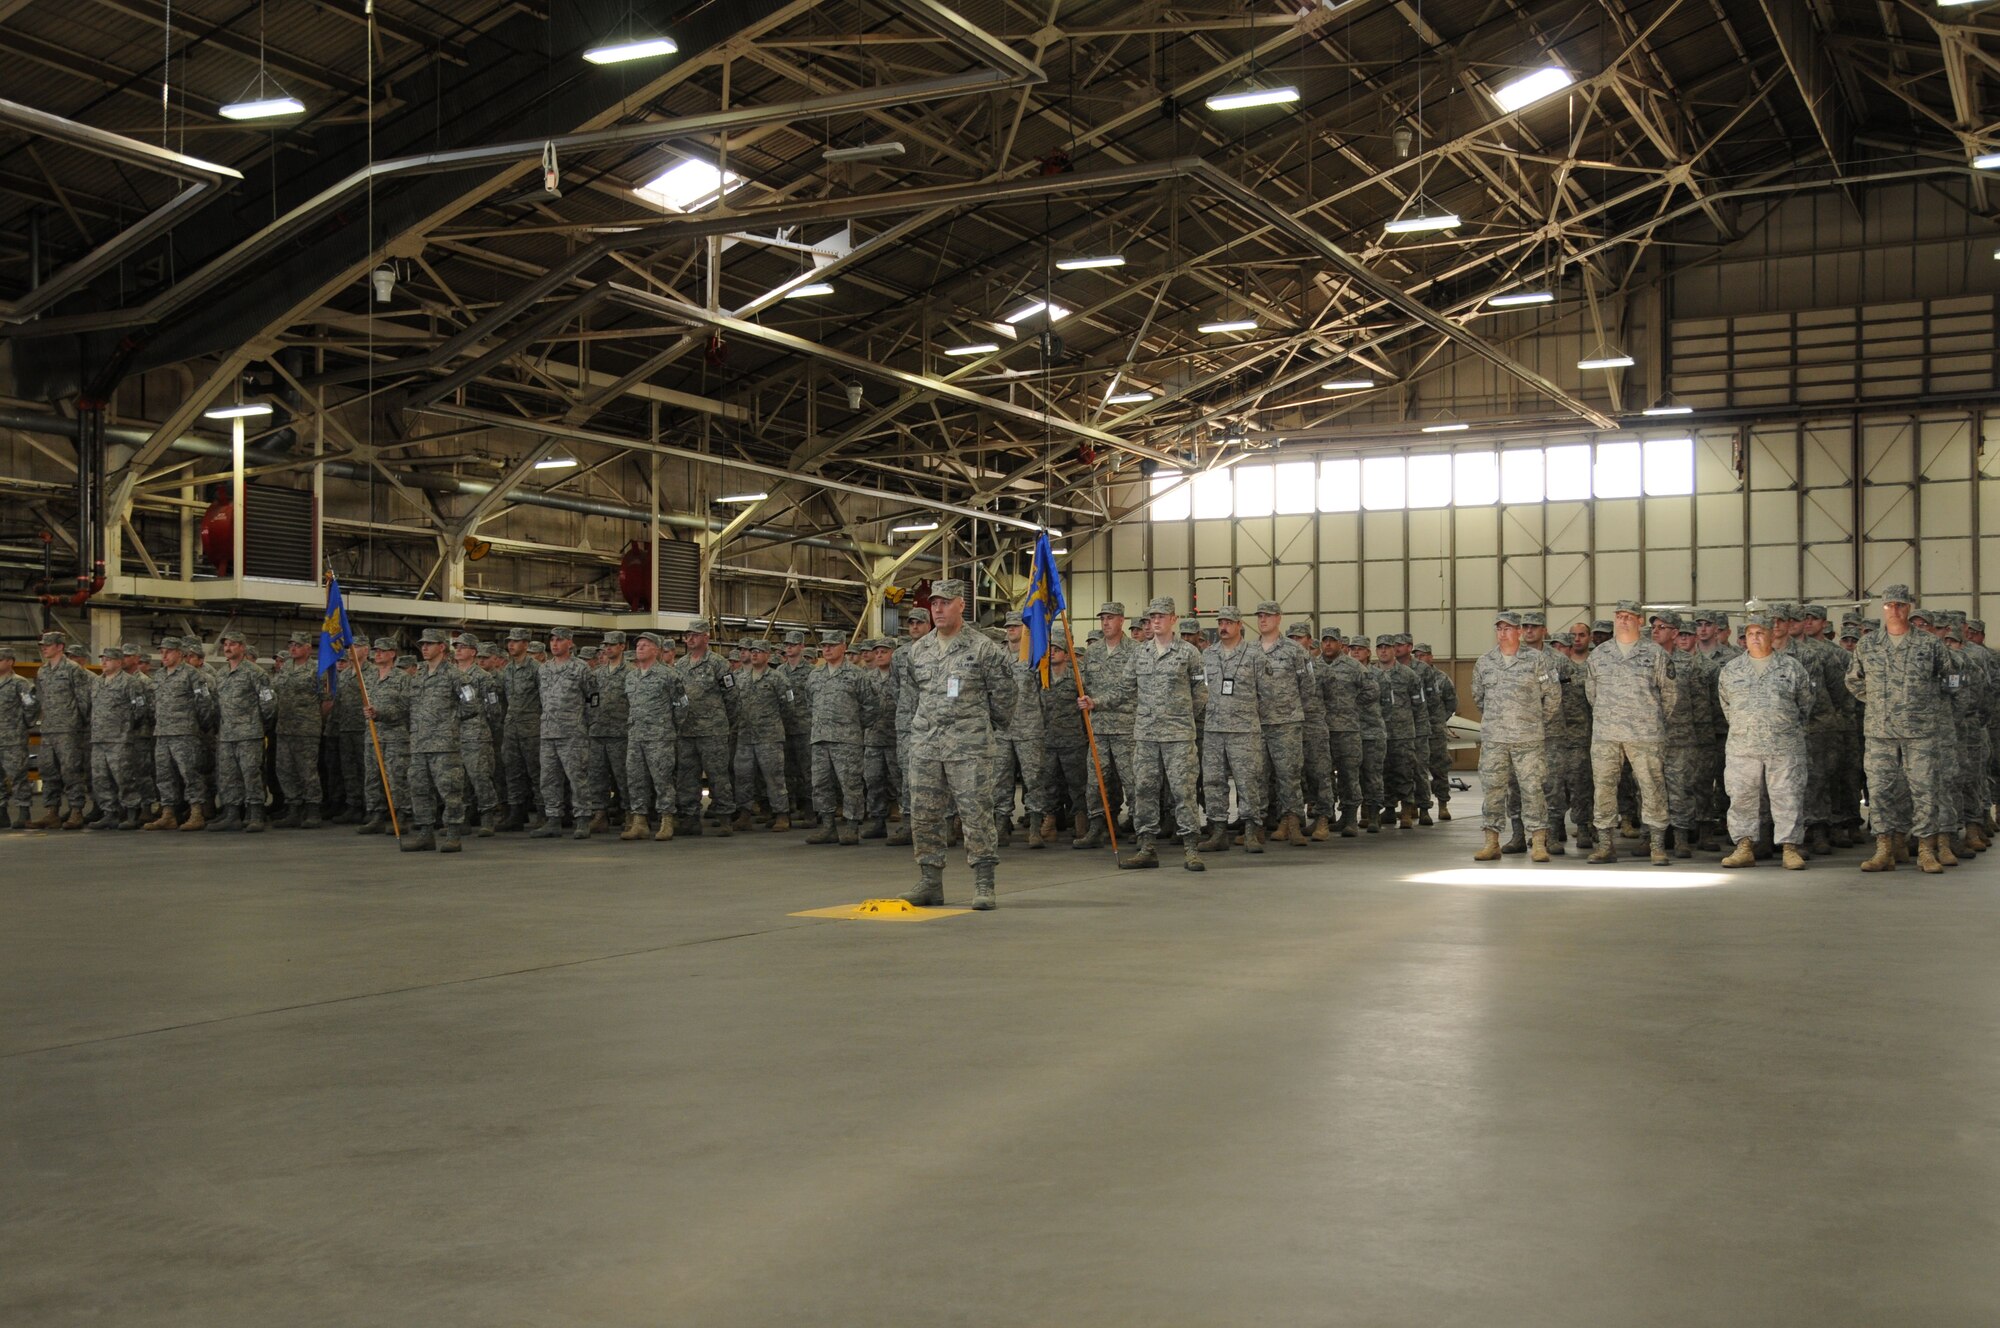 Members of the 103rd Maintenance Group, Connecticut Air National Guard, stand in formation during the annual maintenance group awards ceremony at Bradley Air National Guard Base, East Granby, Conn., April 17, 2011. Awards were given in recognition of the multiple accomplishments of the 103rd Maintenance group members during 2010. (U.S. Air Force photo by Tech. Sgt. Tedd Andrews)